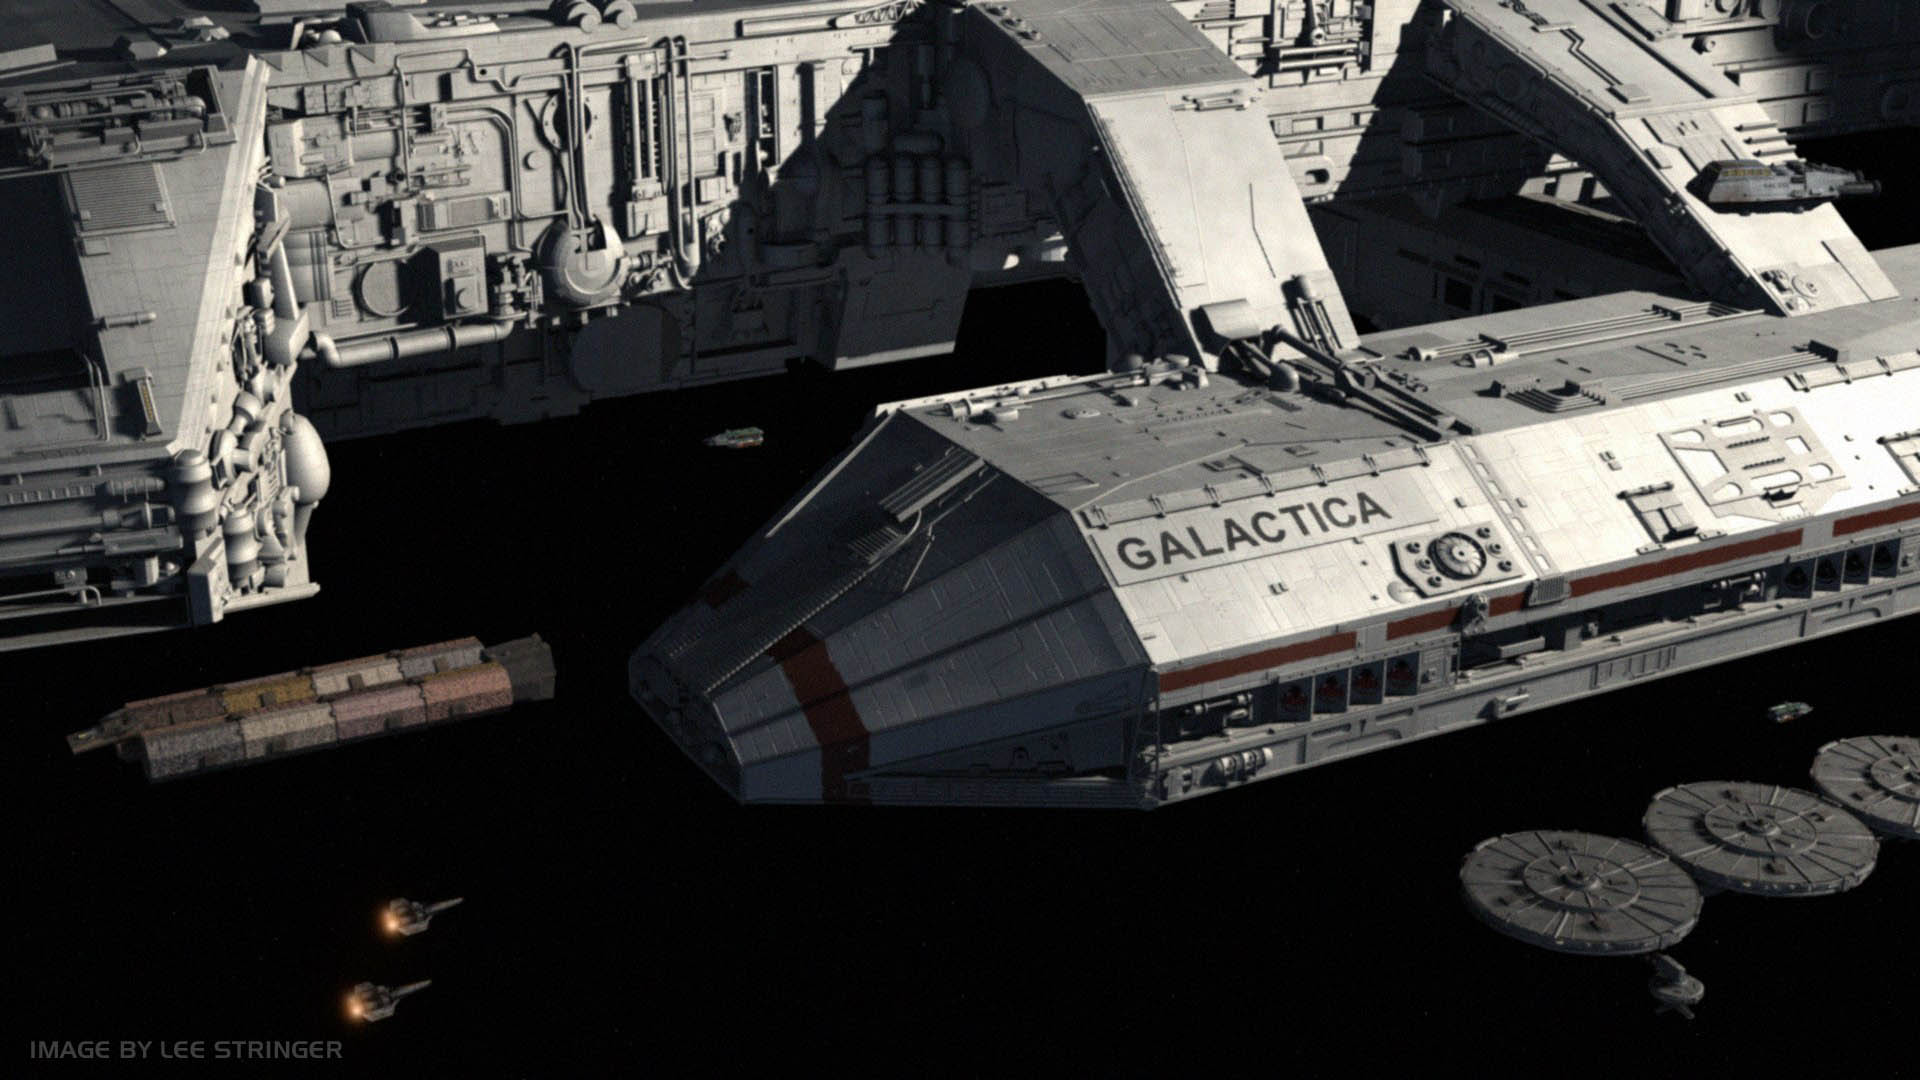 Battlestar Galactica Image You Can Use It As Your Wallpaper Etc